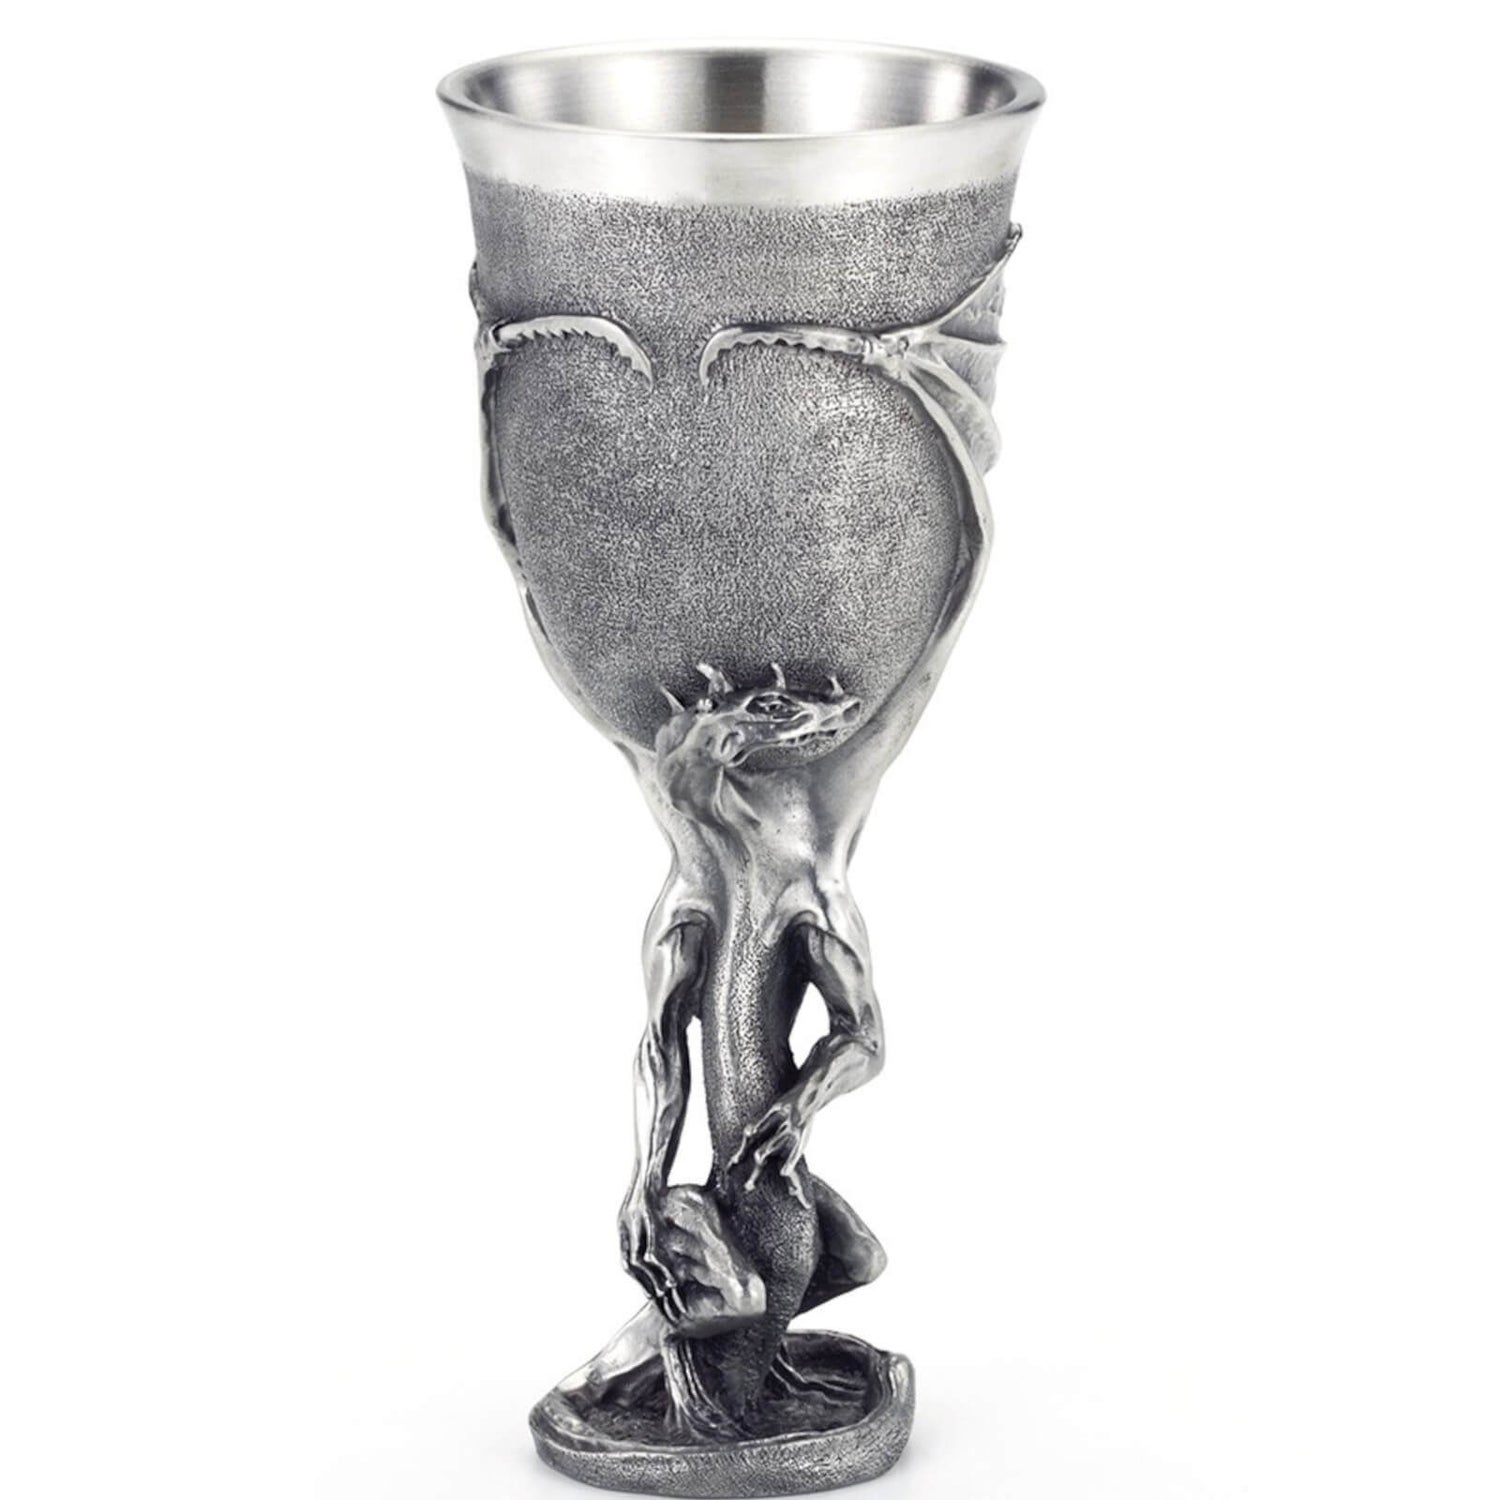 Royal Selangor Lord of the Rings Pewter Goblet - Smaug Merchandise ...